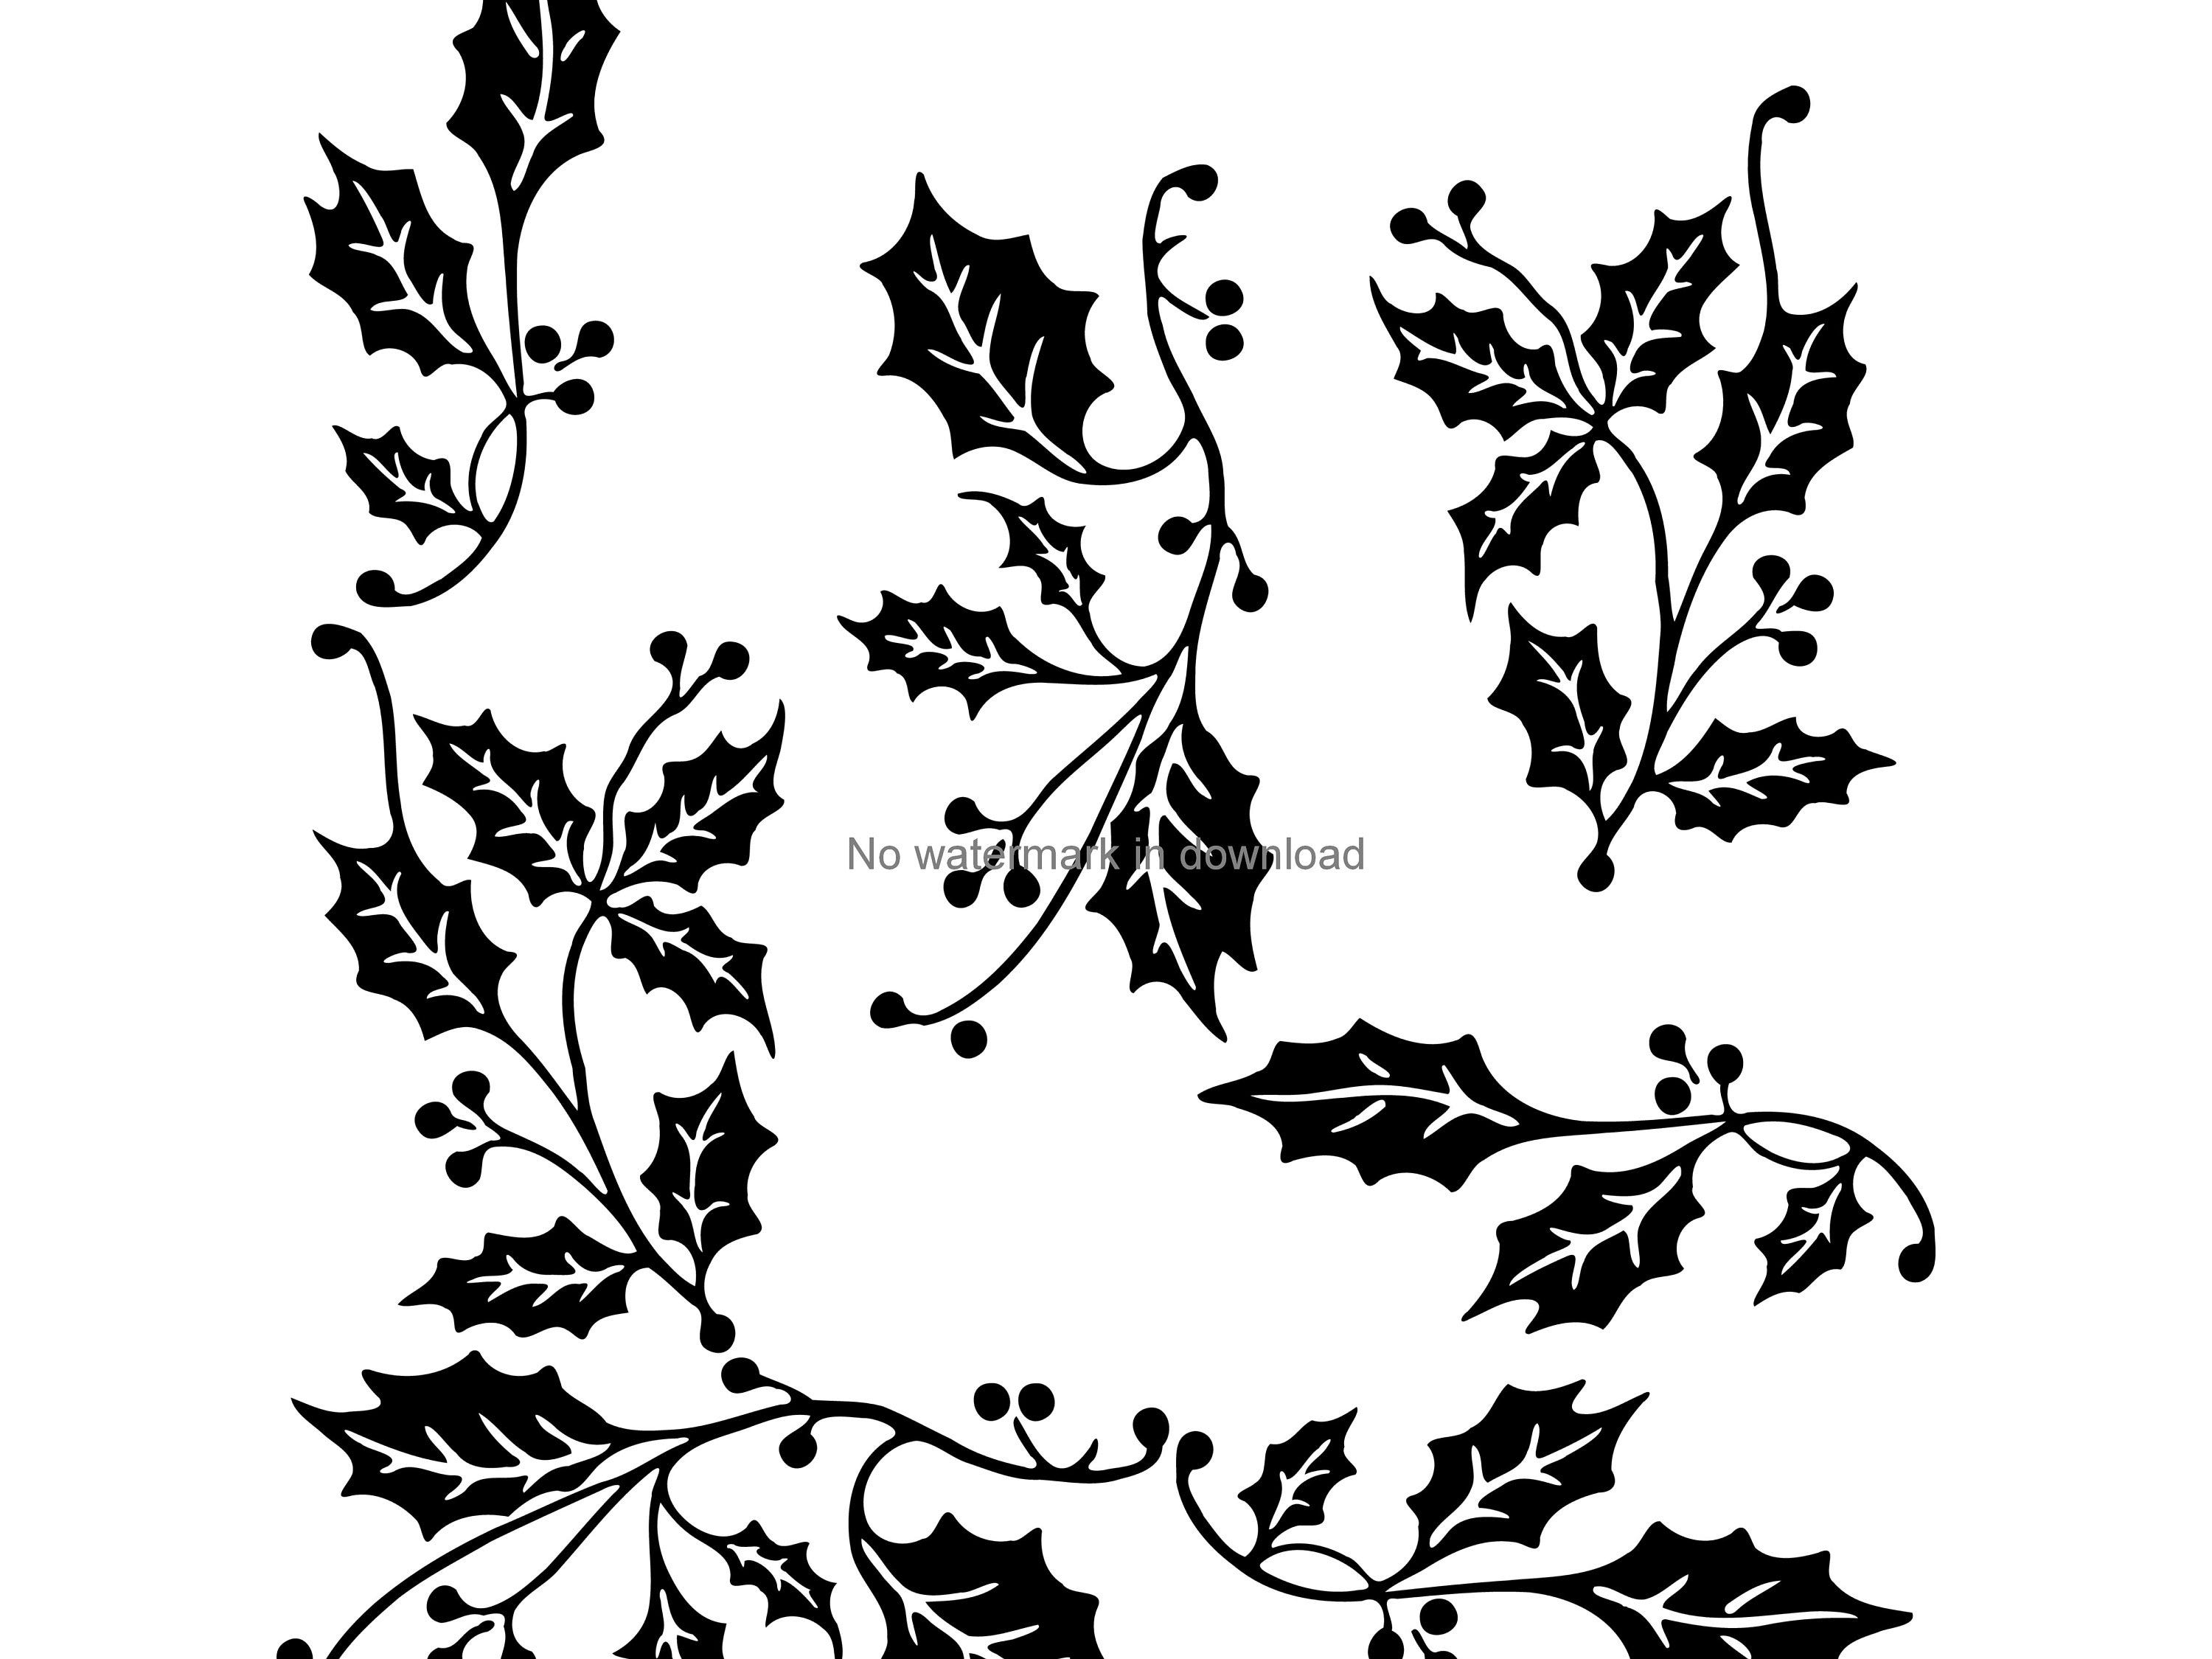 Holly Borders Svg Design, Holly Borders Svg Vector, Holly Borders Svg Dxf Png, Holly Borders Cutting Clipart